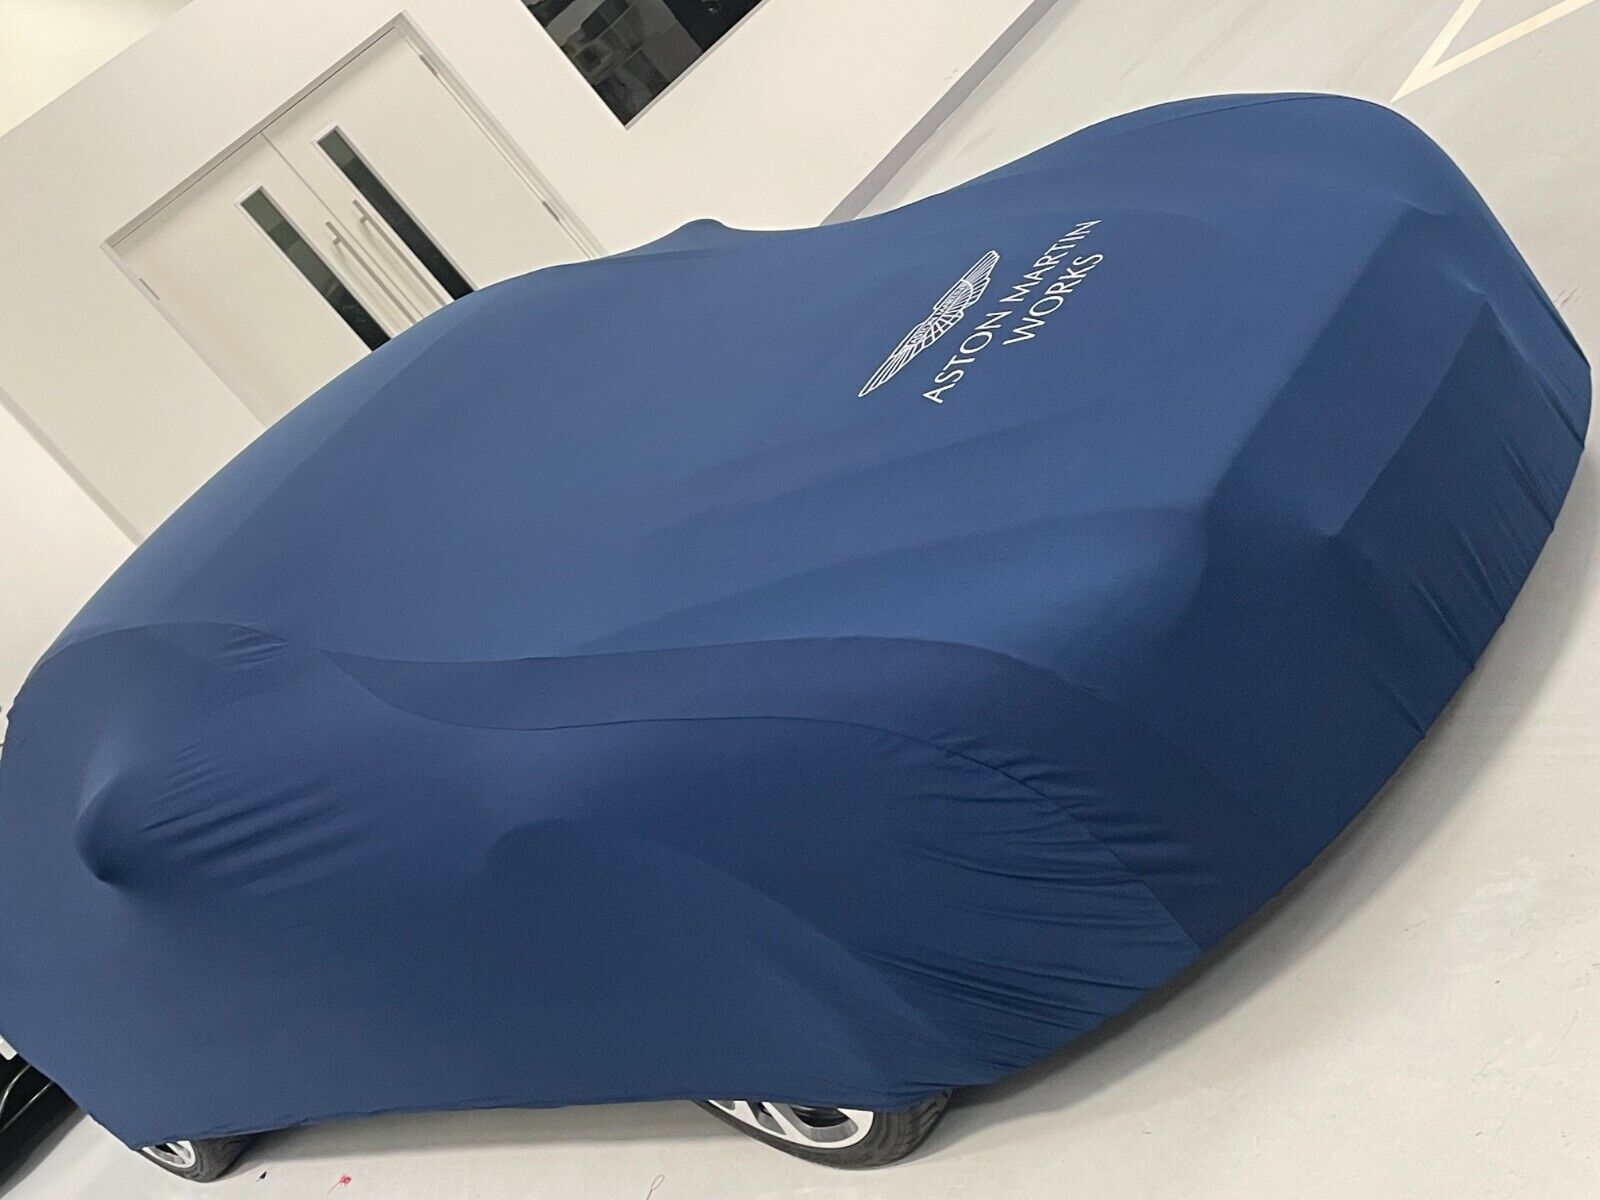 Aston Martin Works Soft Stretch Car Cover in Navy Blue with Silver Wings Logo